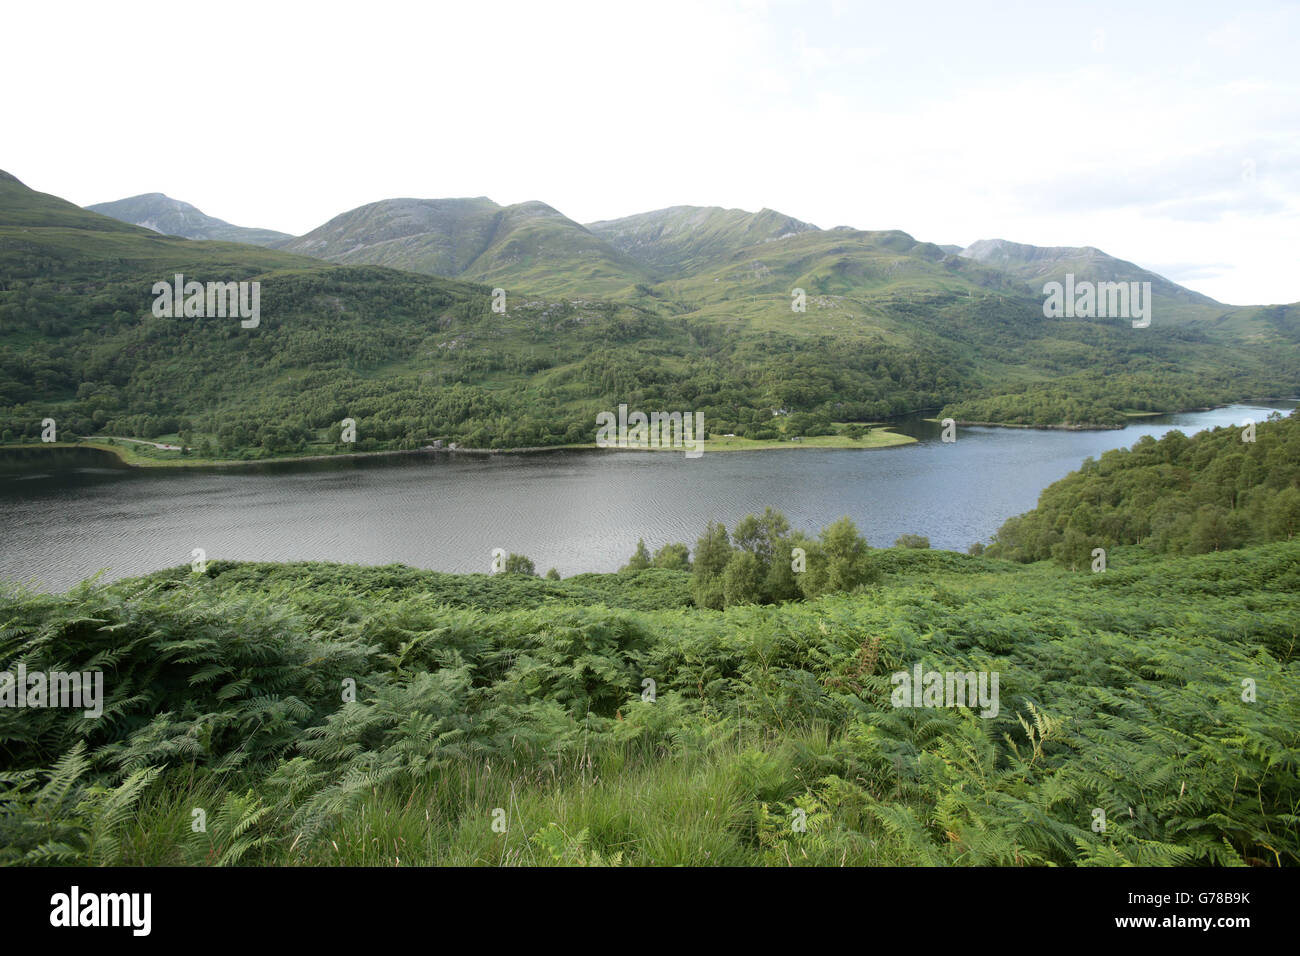 A view of Loch Leven and the mountains of Glencoe, in the Highlands of Scotland. PRESS ASSOCIATION Photo. Picture date: Tuesday July 15, 2014. Photo credit should read: Yui Mok/PA Wire Stock Photo